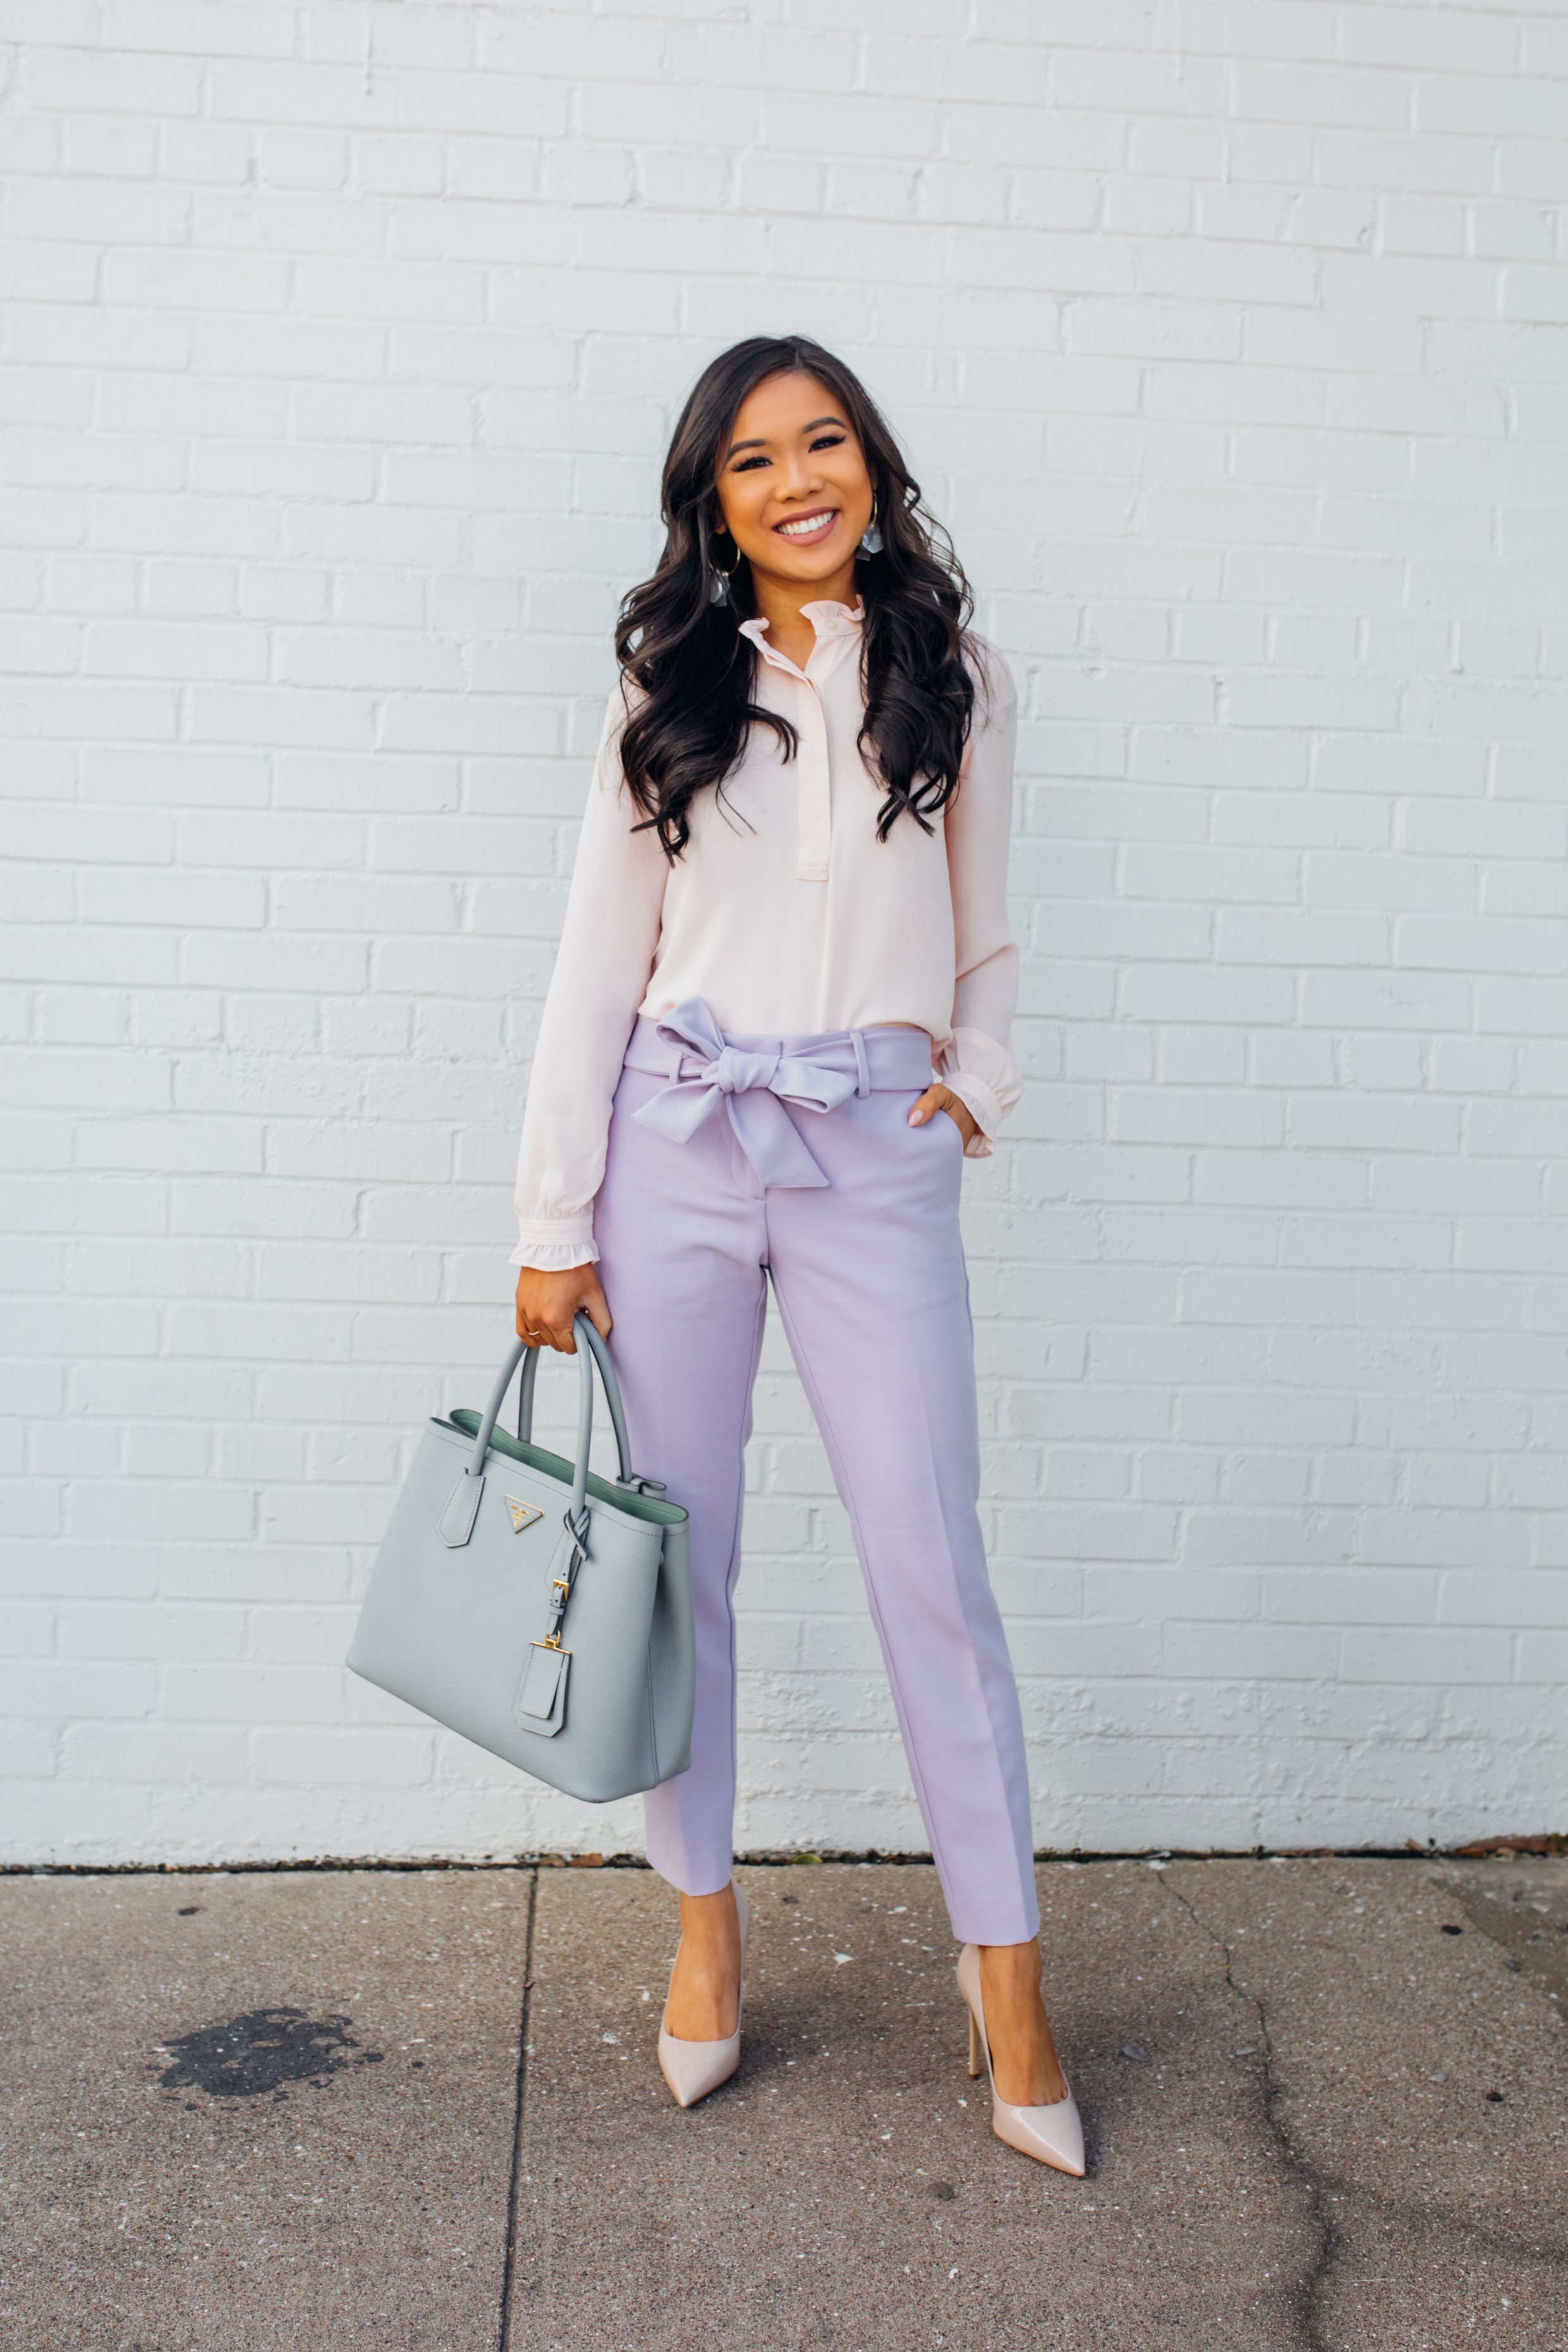 Blogger Hoang-Kim wears a pair of lavender tie-waist pants for spring